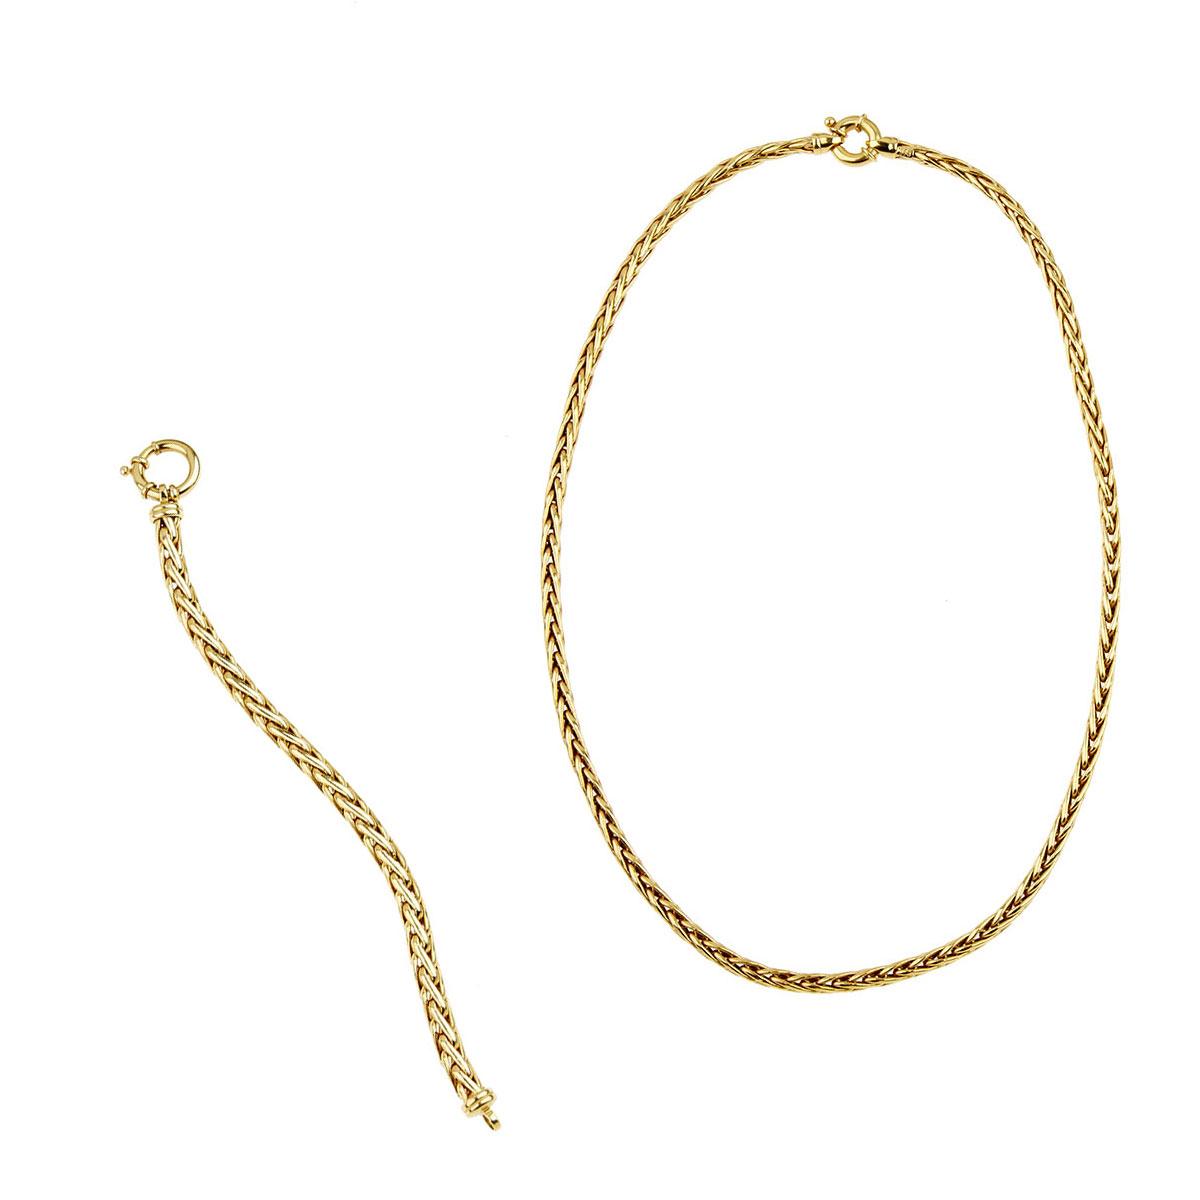 Italian 18k Yellow Gold Rope Chain and Bracelet